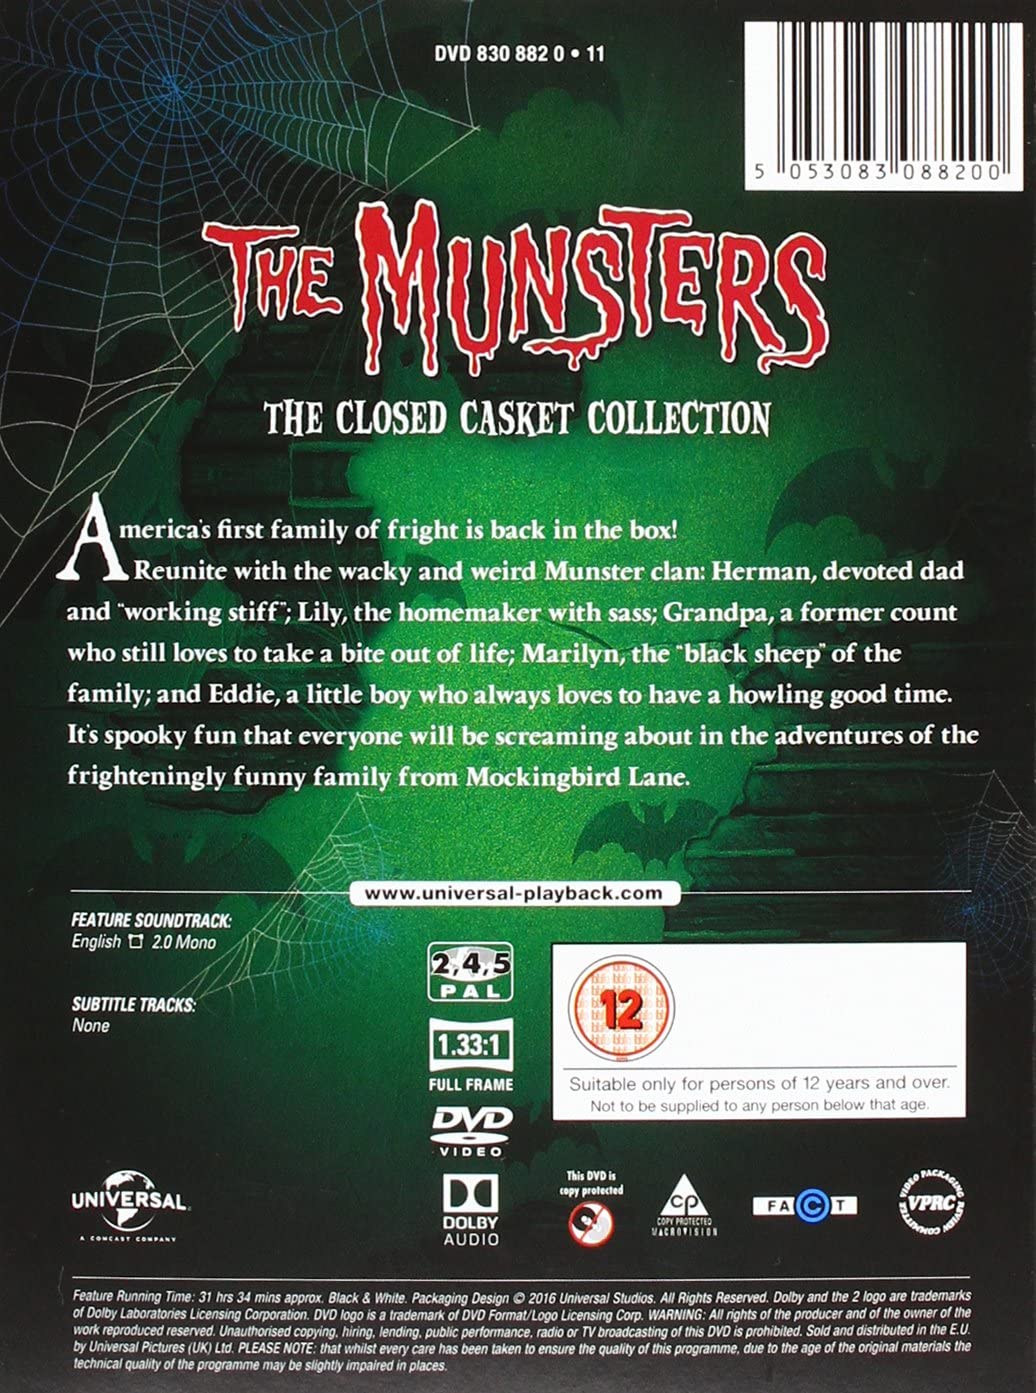 The Munsters: The Closed Casket Collection - The Complete Series - Sitcom  [DVD]